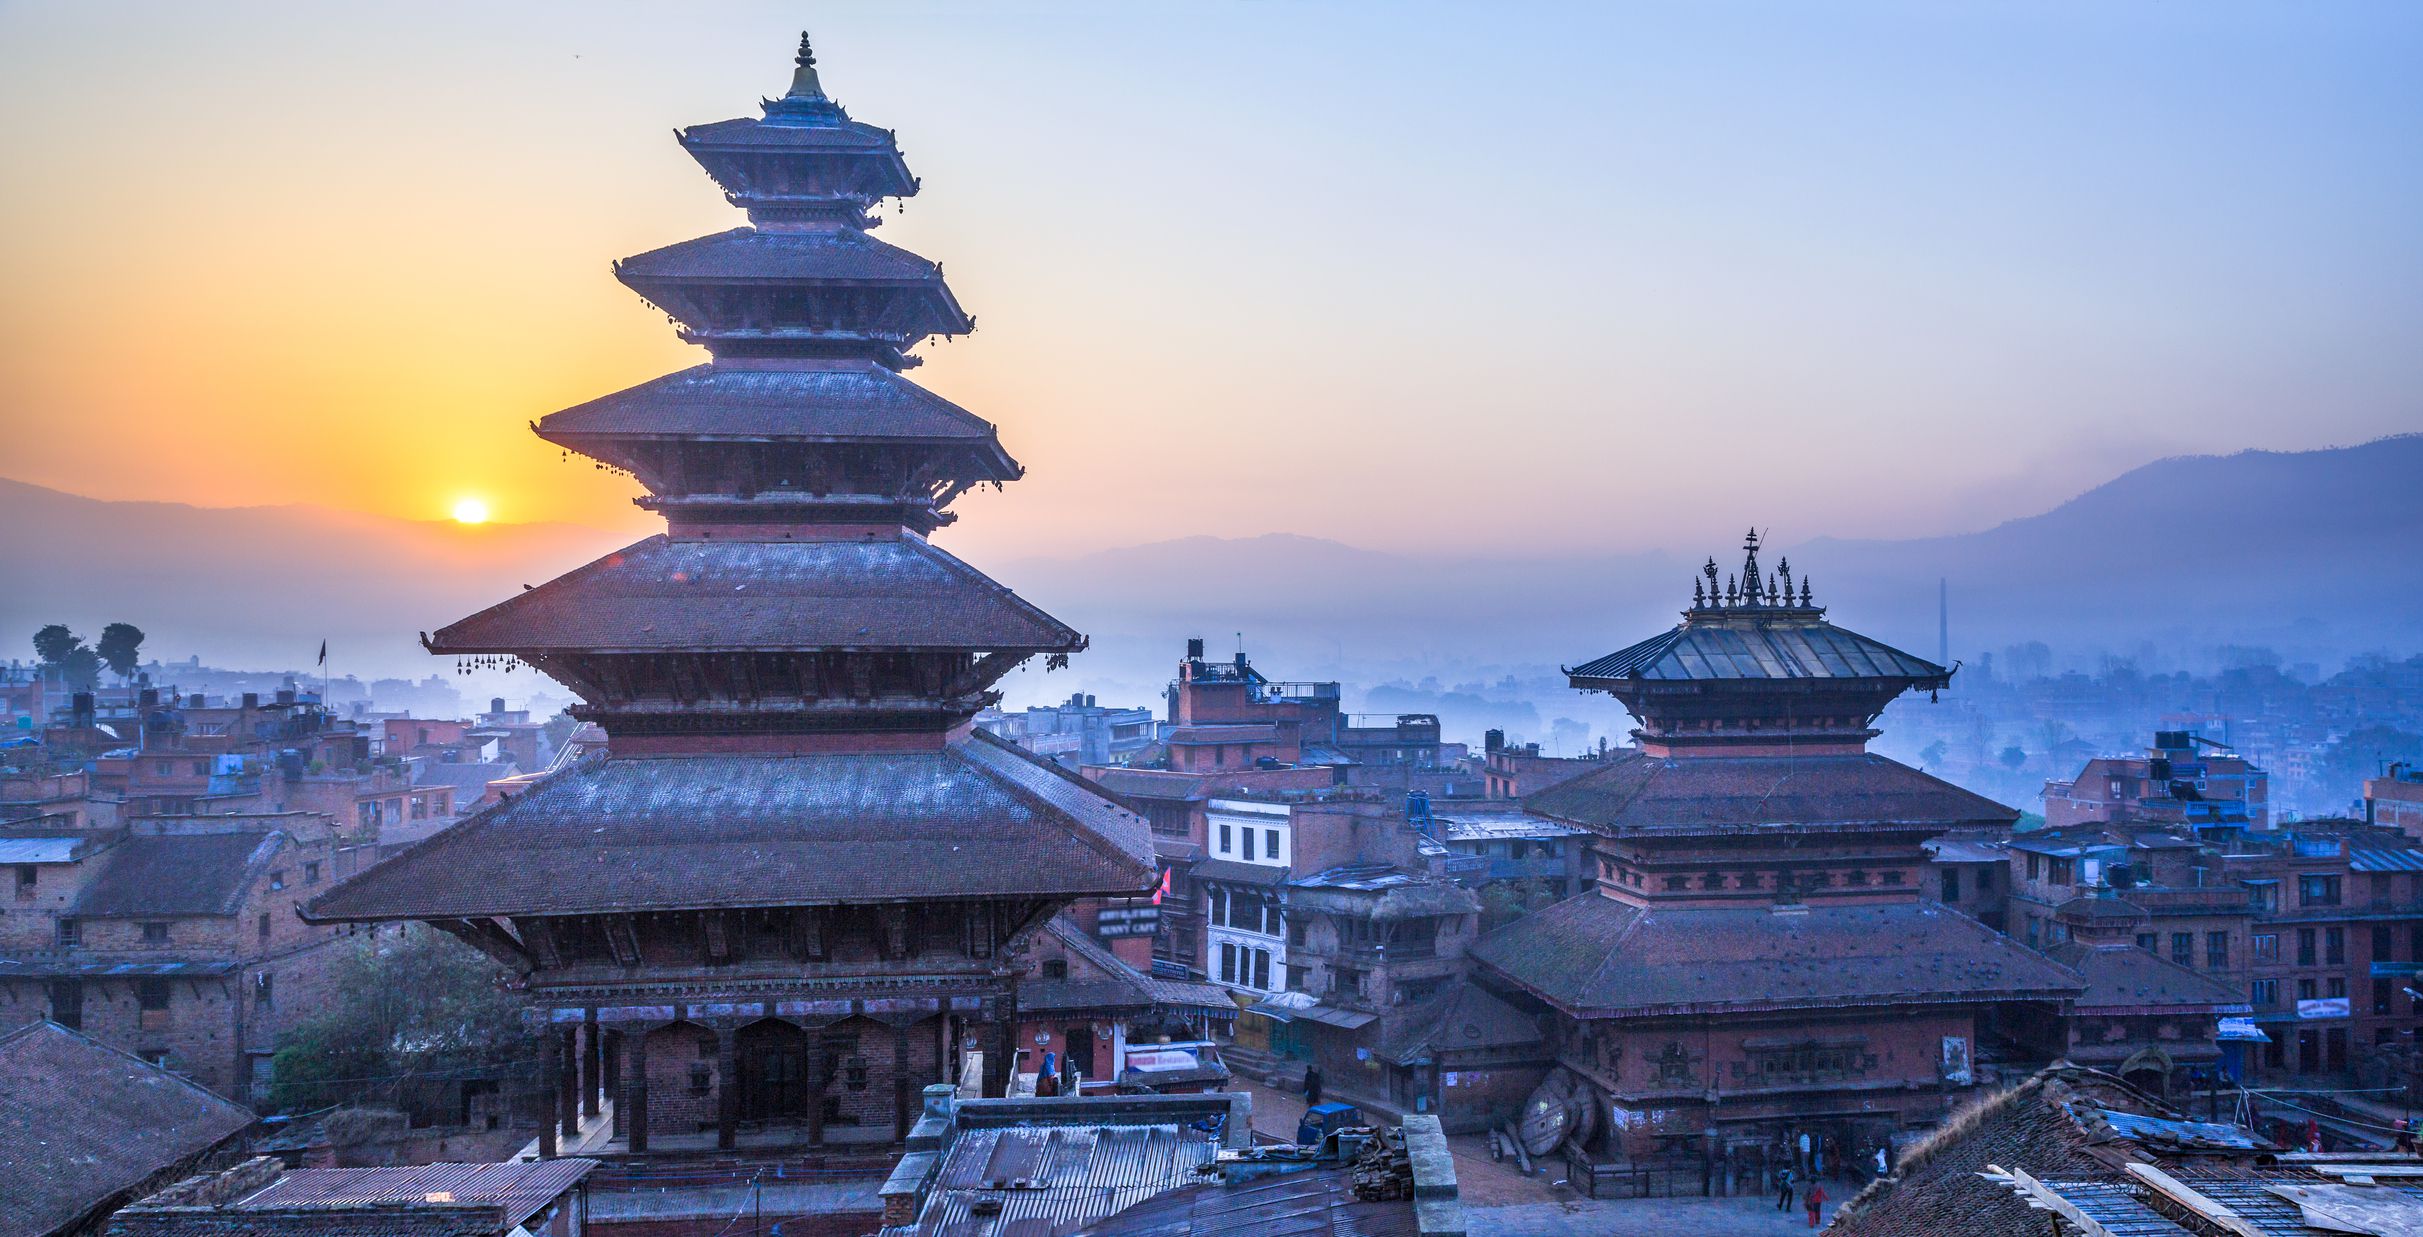 Nepal's old infrastructures during sunrise